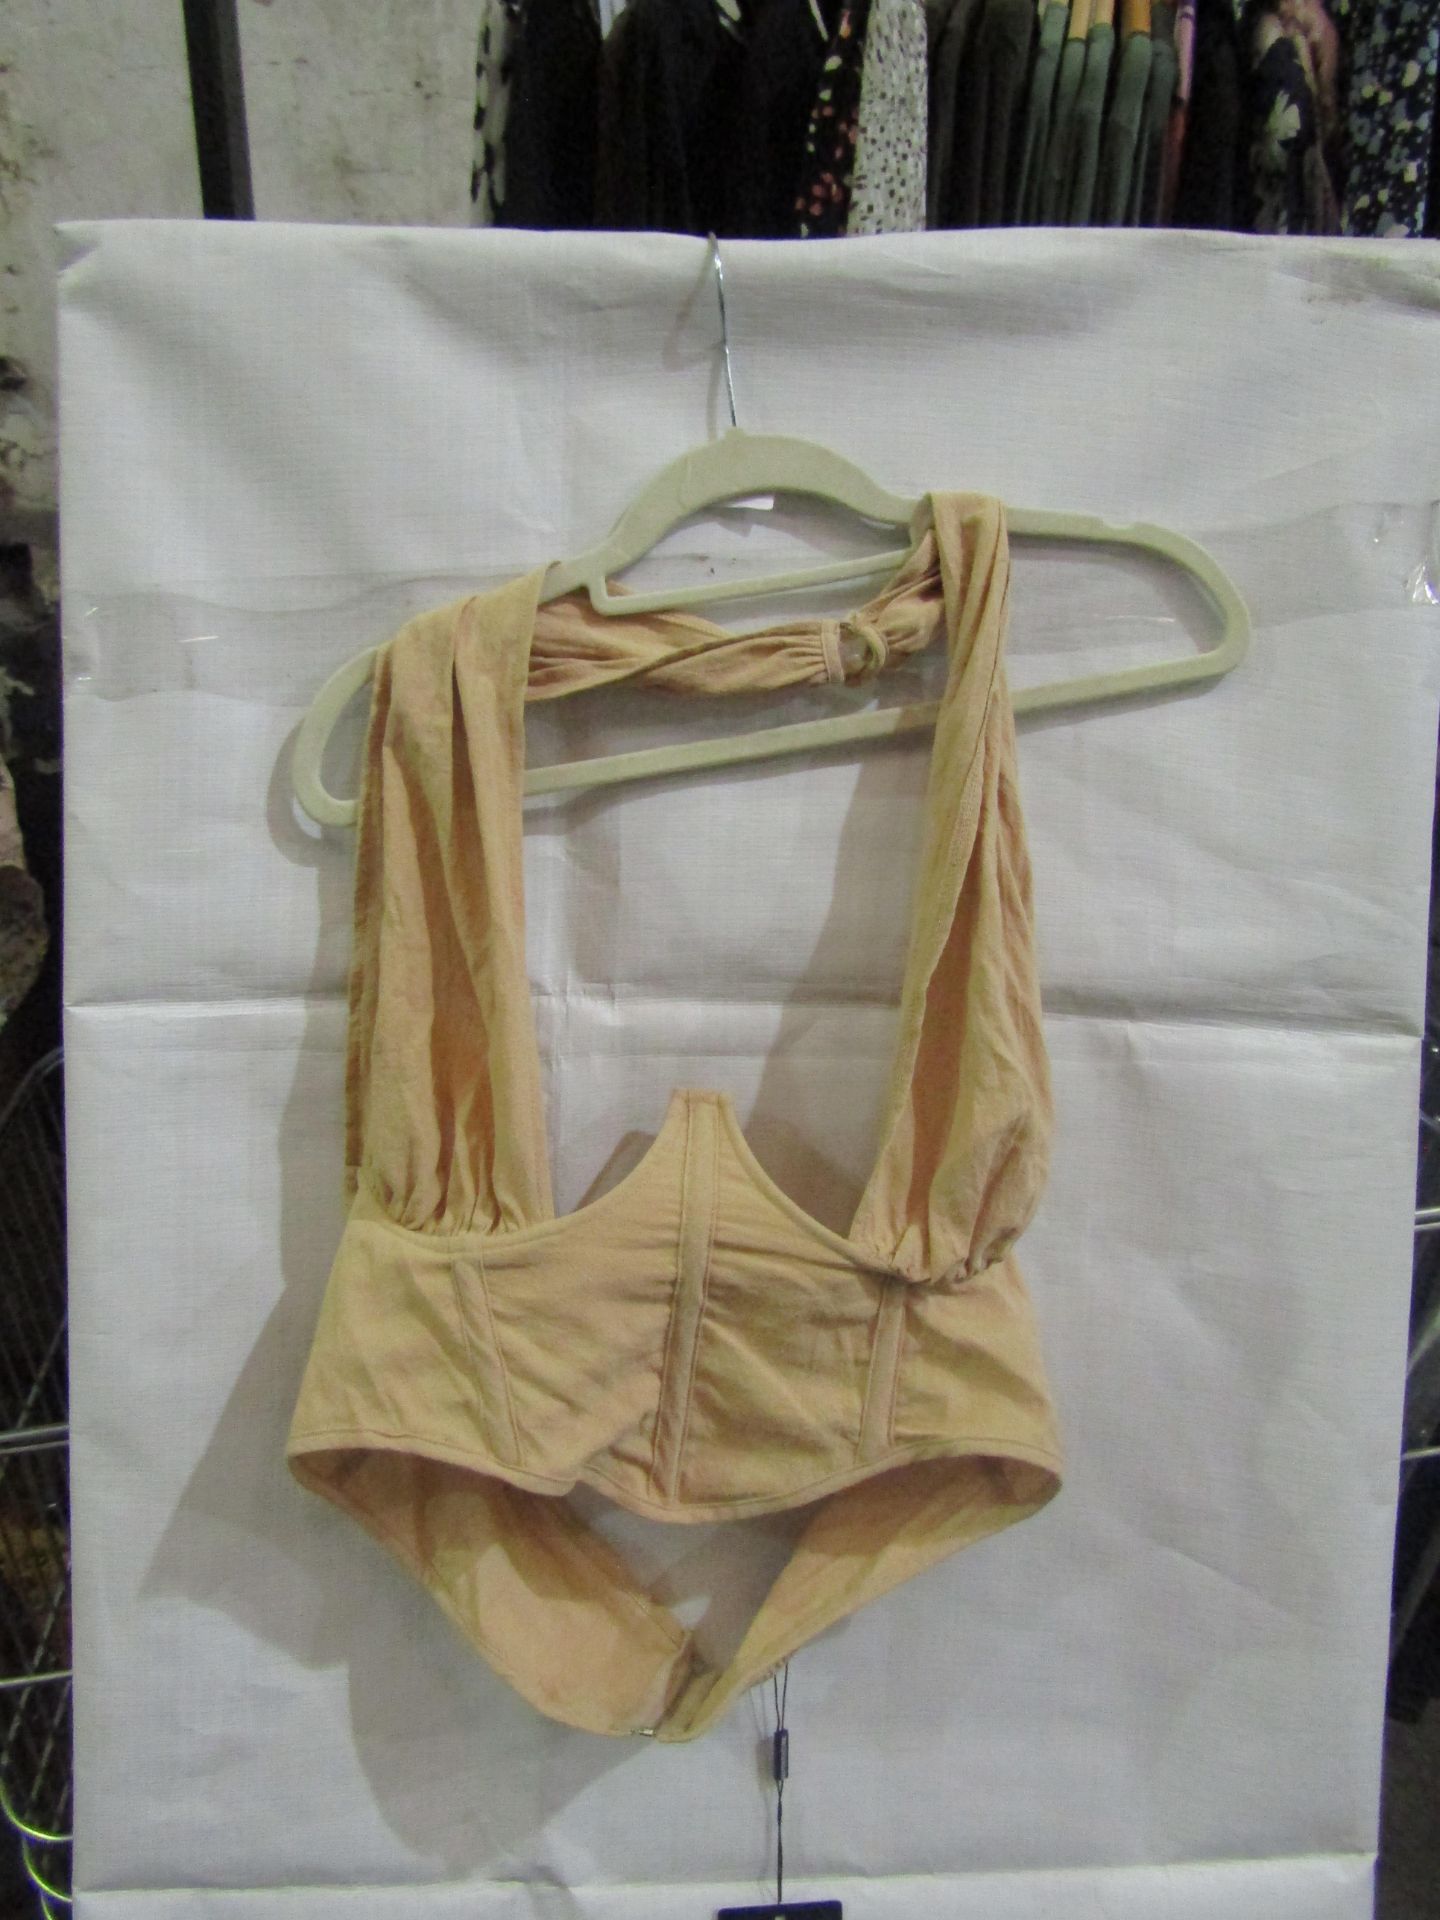 4x Pretty Little Thing Oatmeal Linen Look Cross Front Corset- Size 12, New & Packaged.